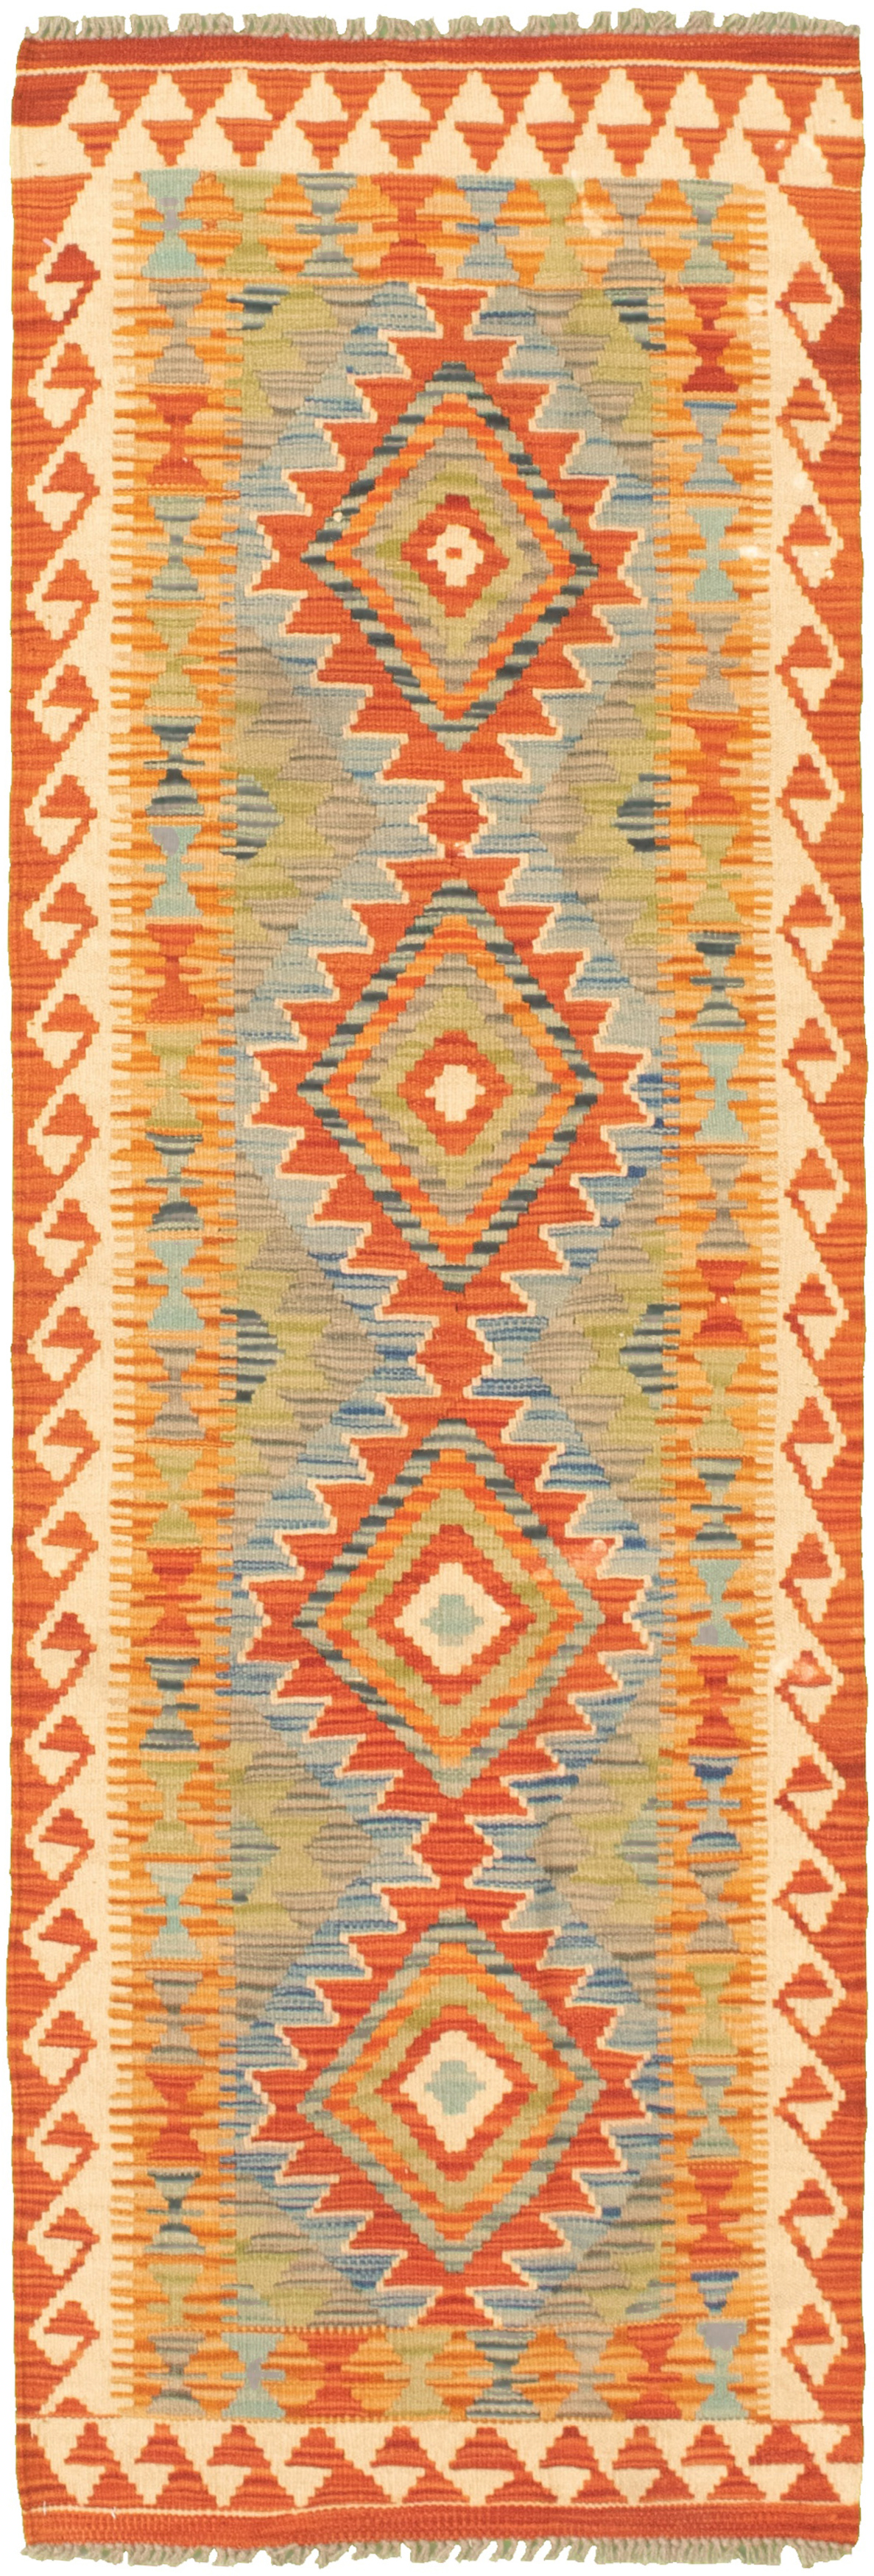 Hand woven Bold and Colorful  Dark Copper Wool Kilim 2'0" x 6'6"  Size: 2'0" x 6'6"  